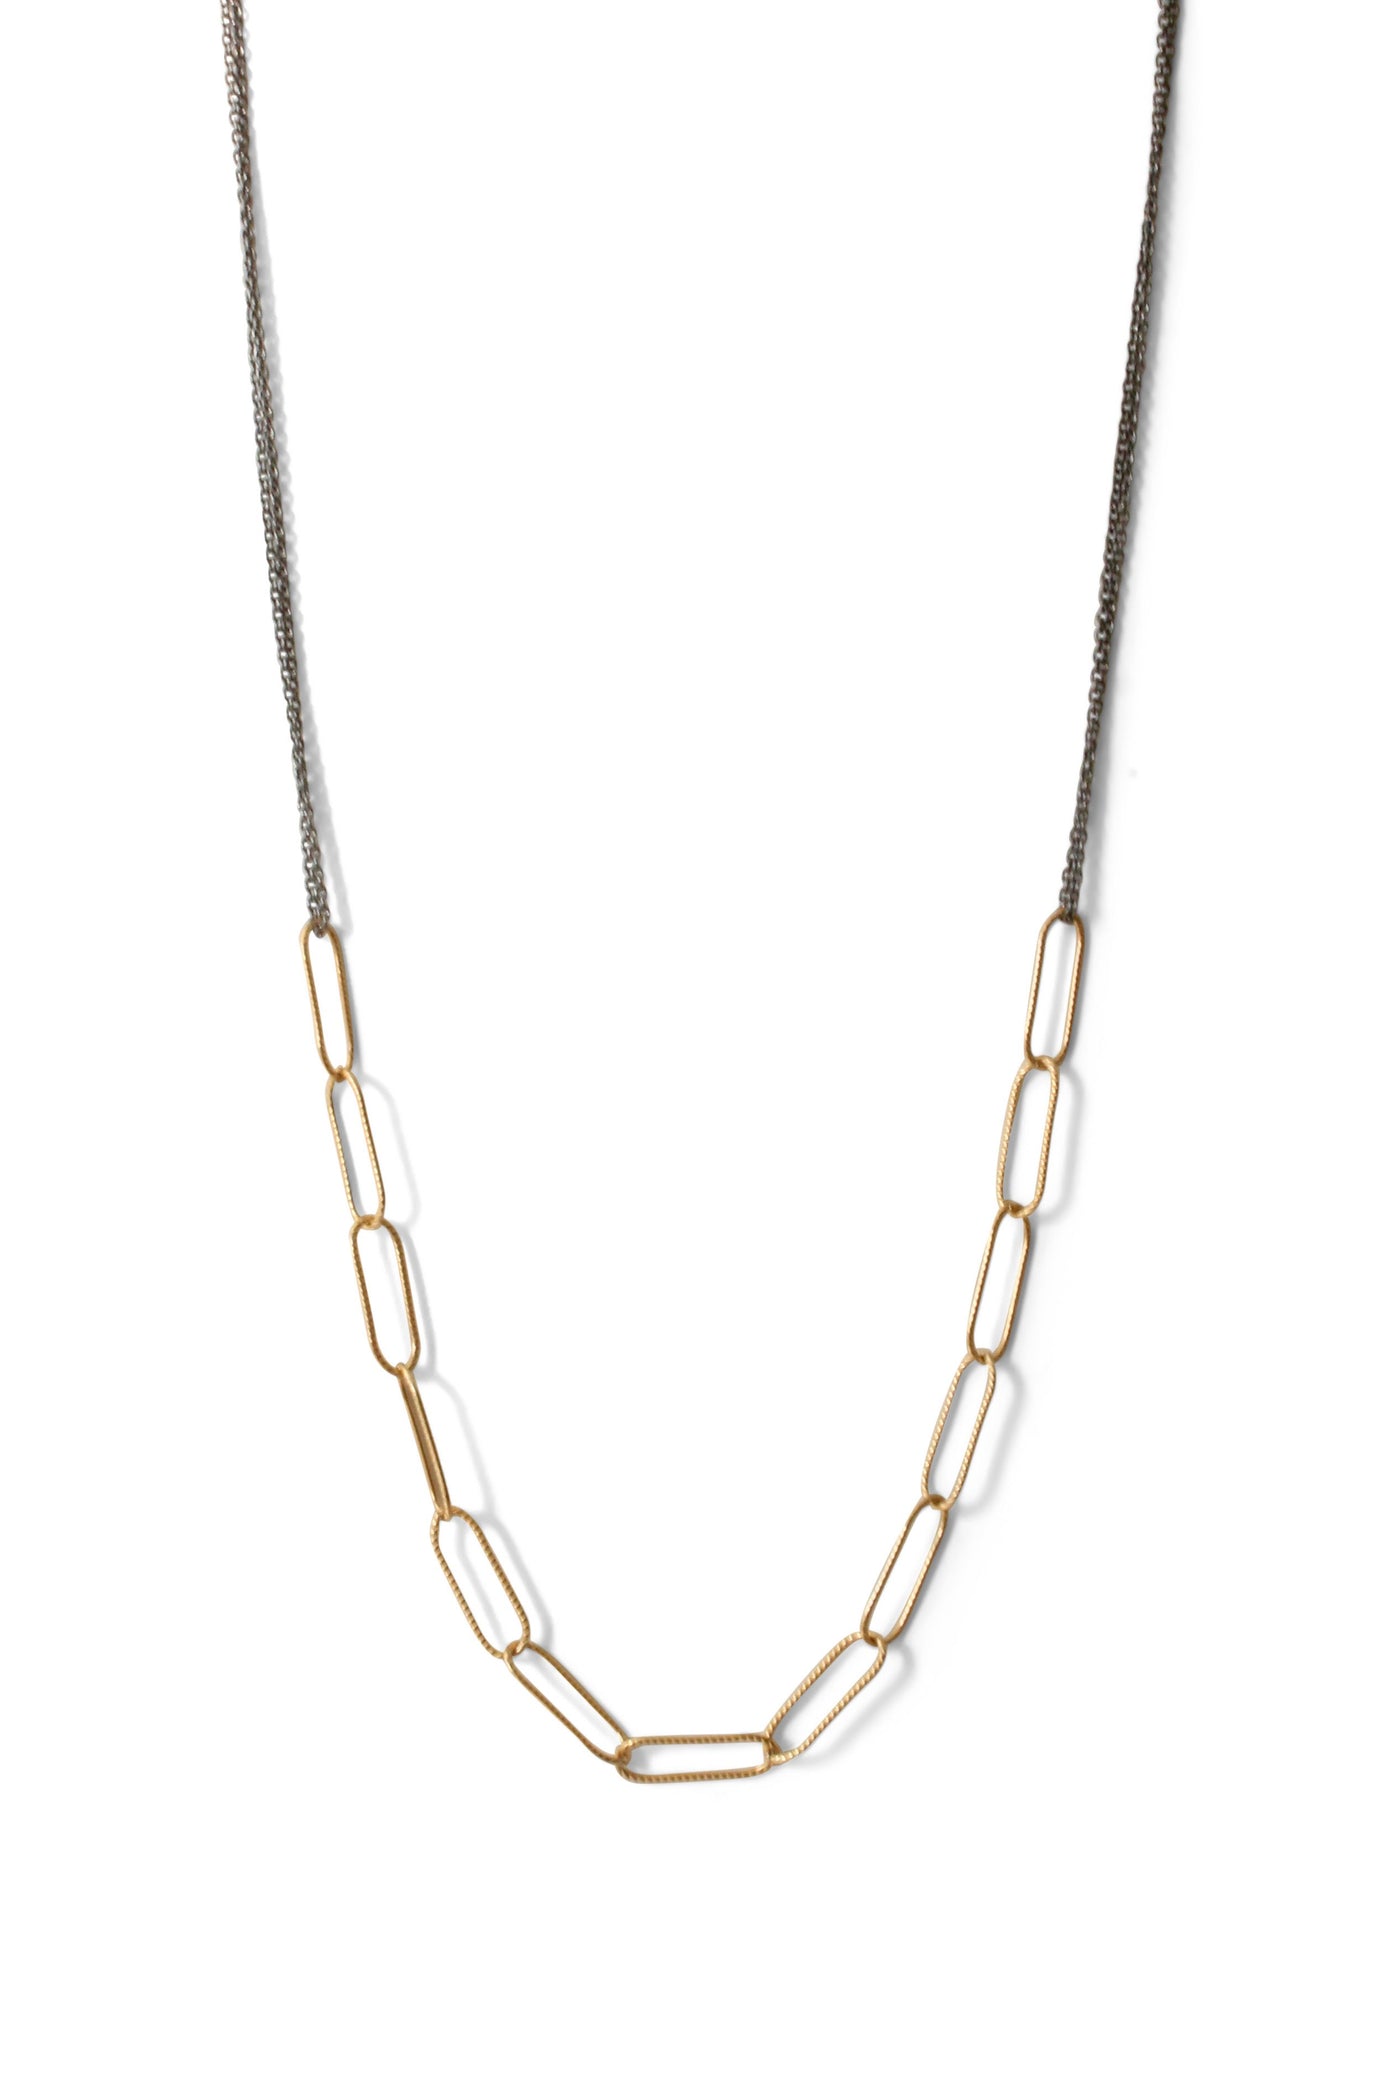 Squared Link Chain Harmony Necklace 32 Inches